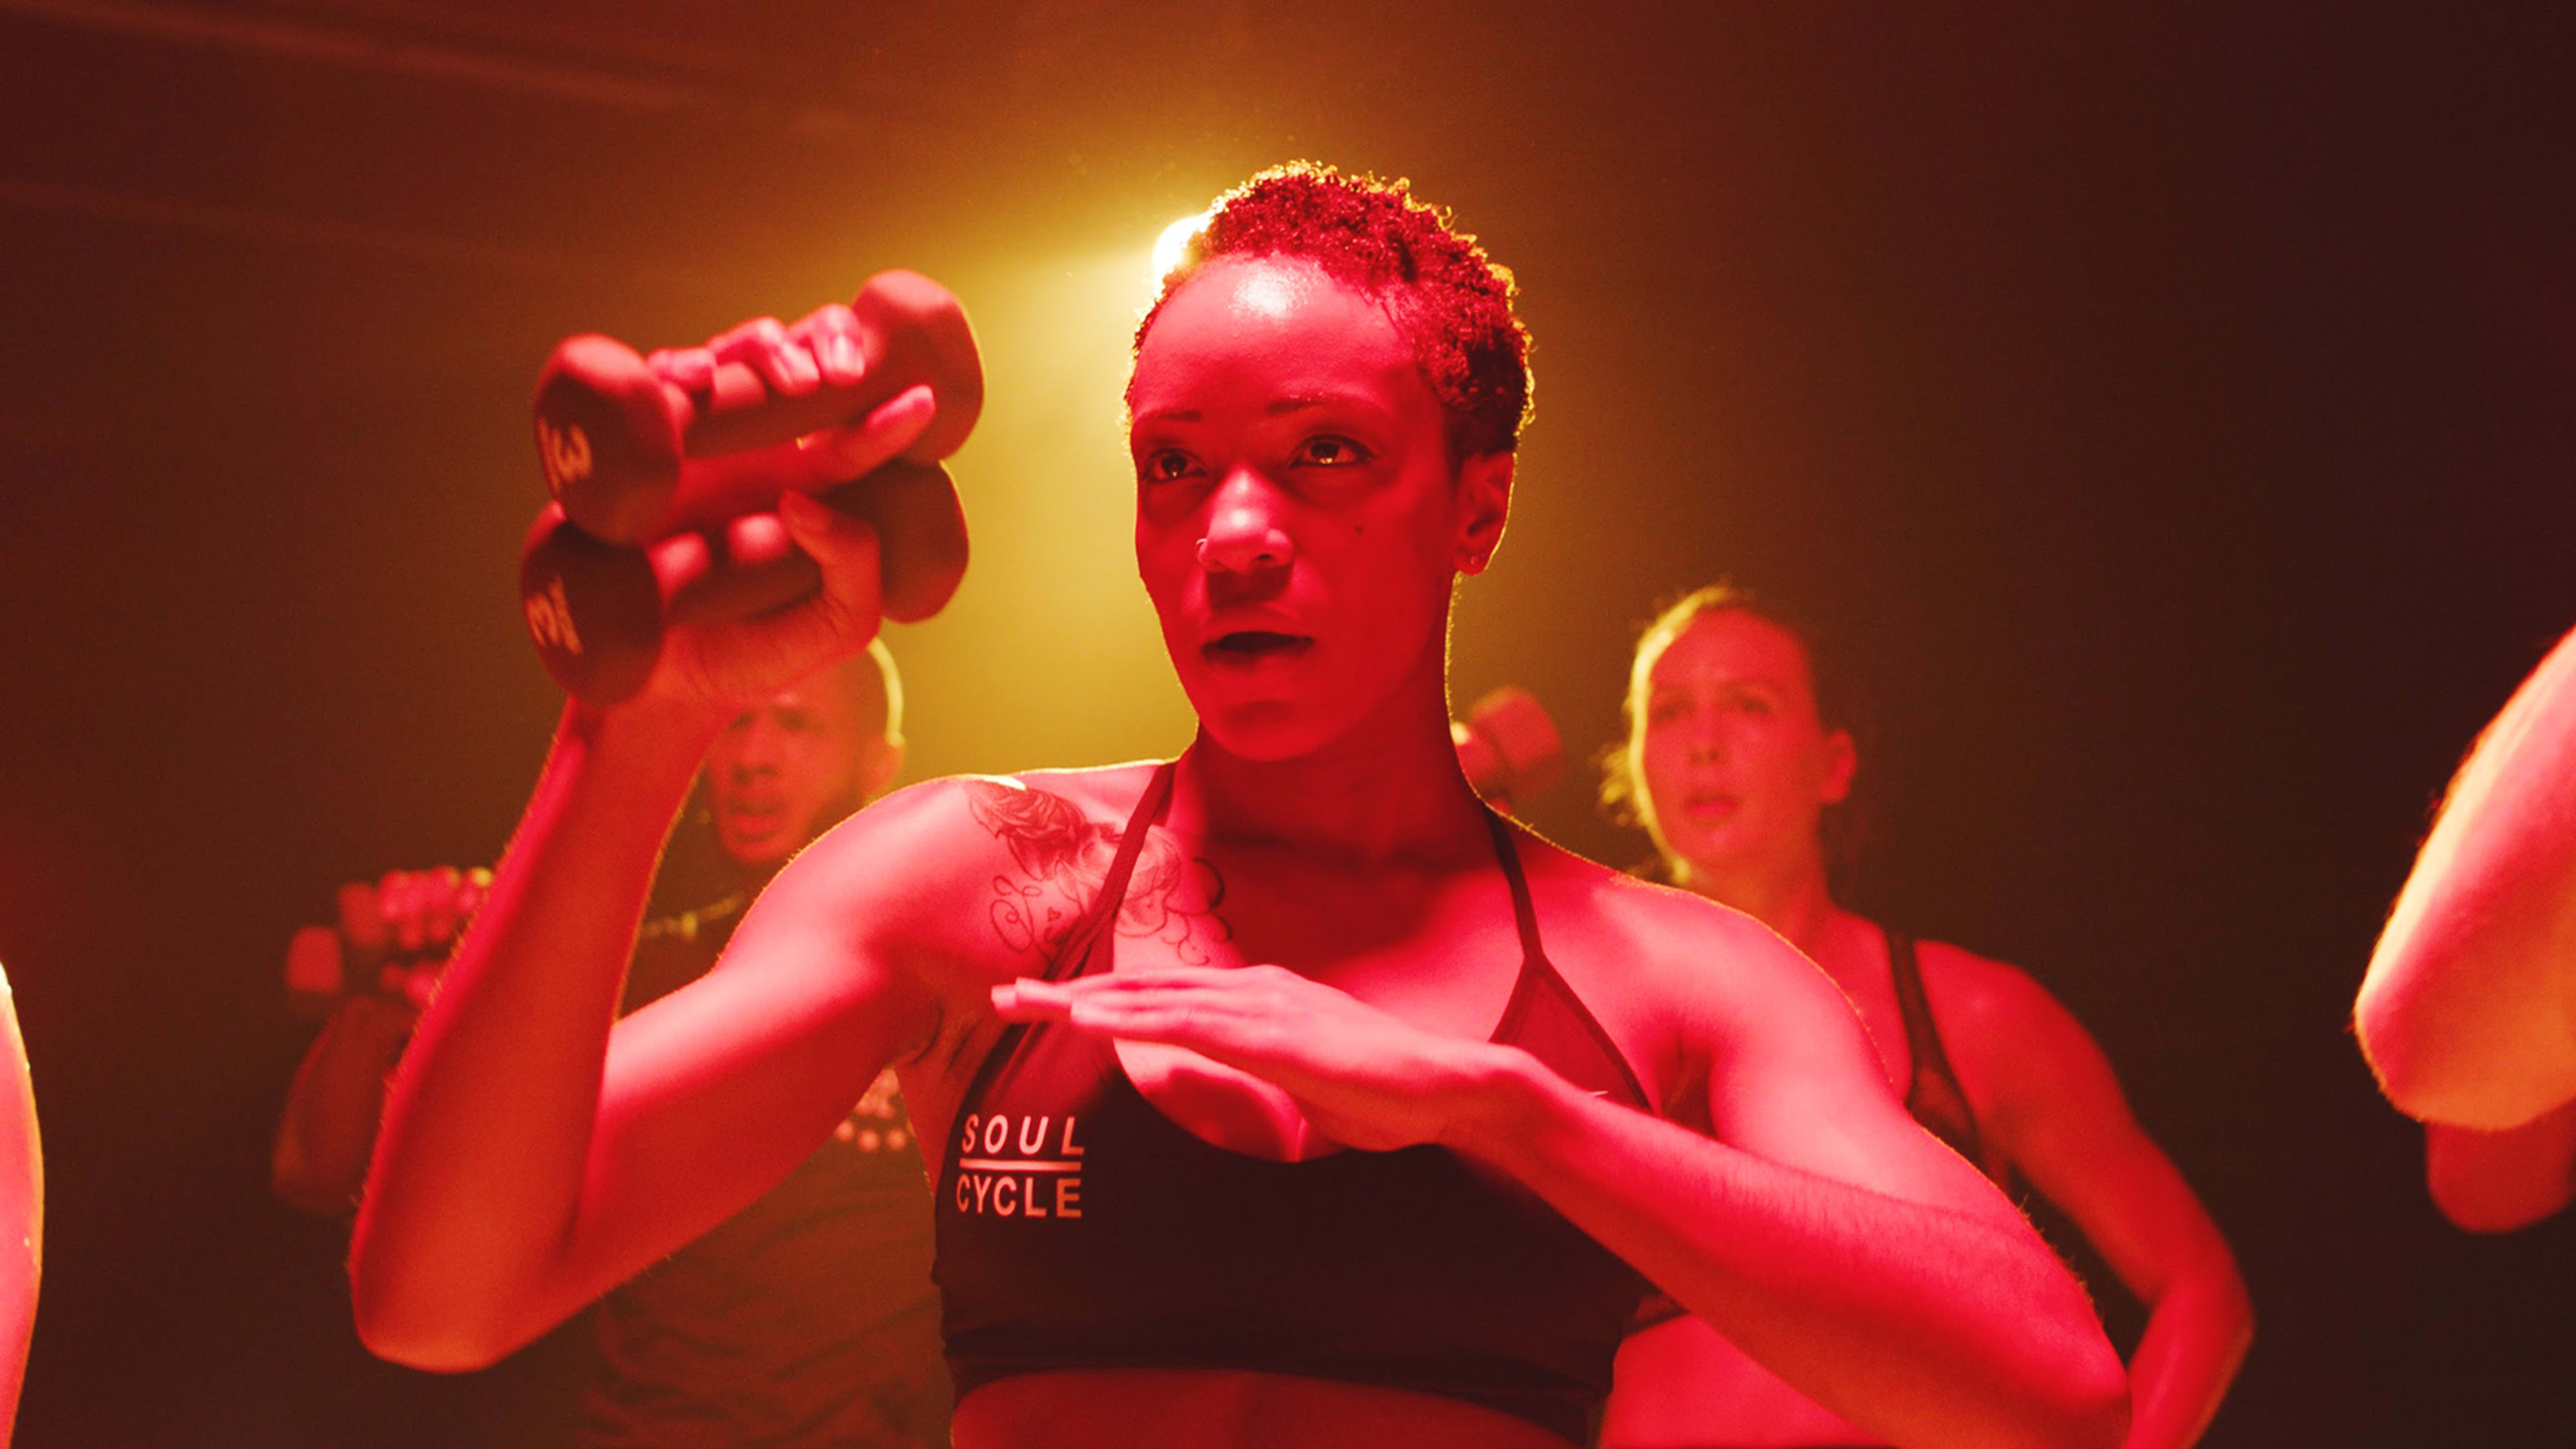 SoulCycle expands further, gets into the HIIT trend